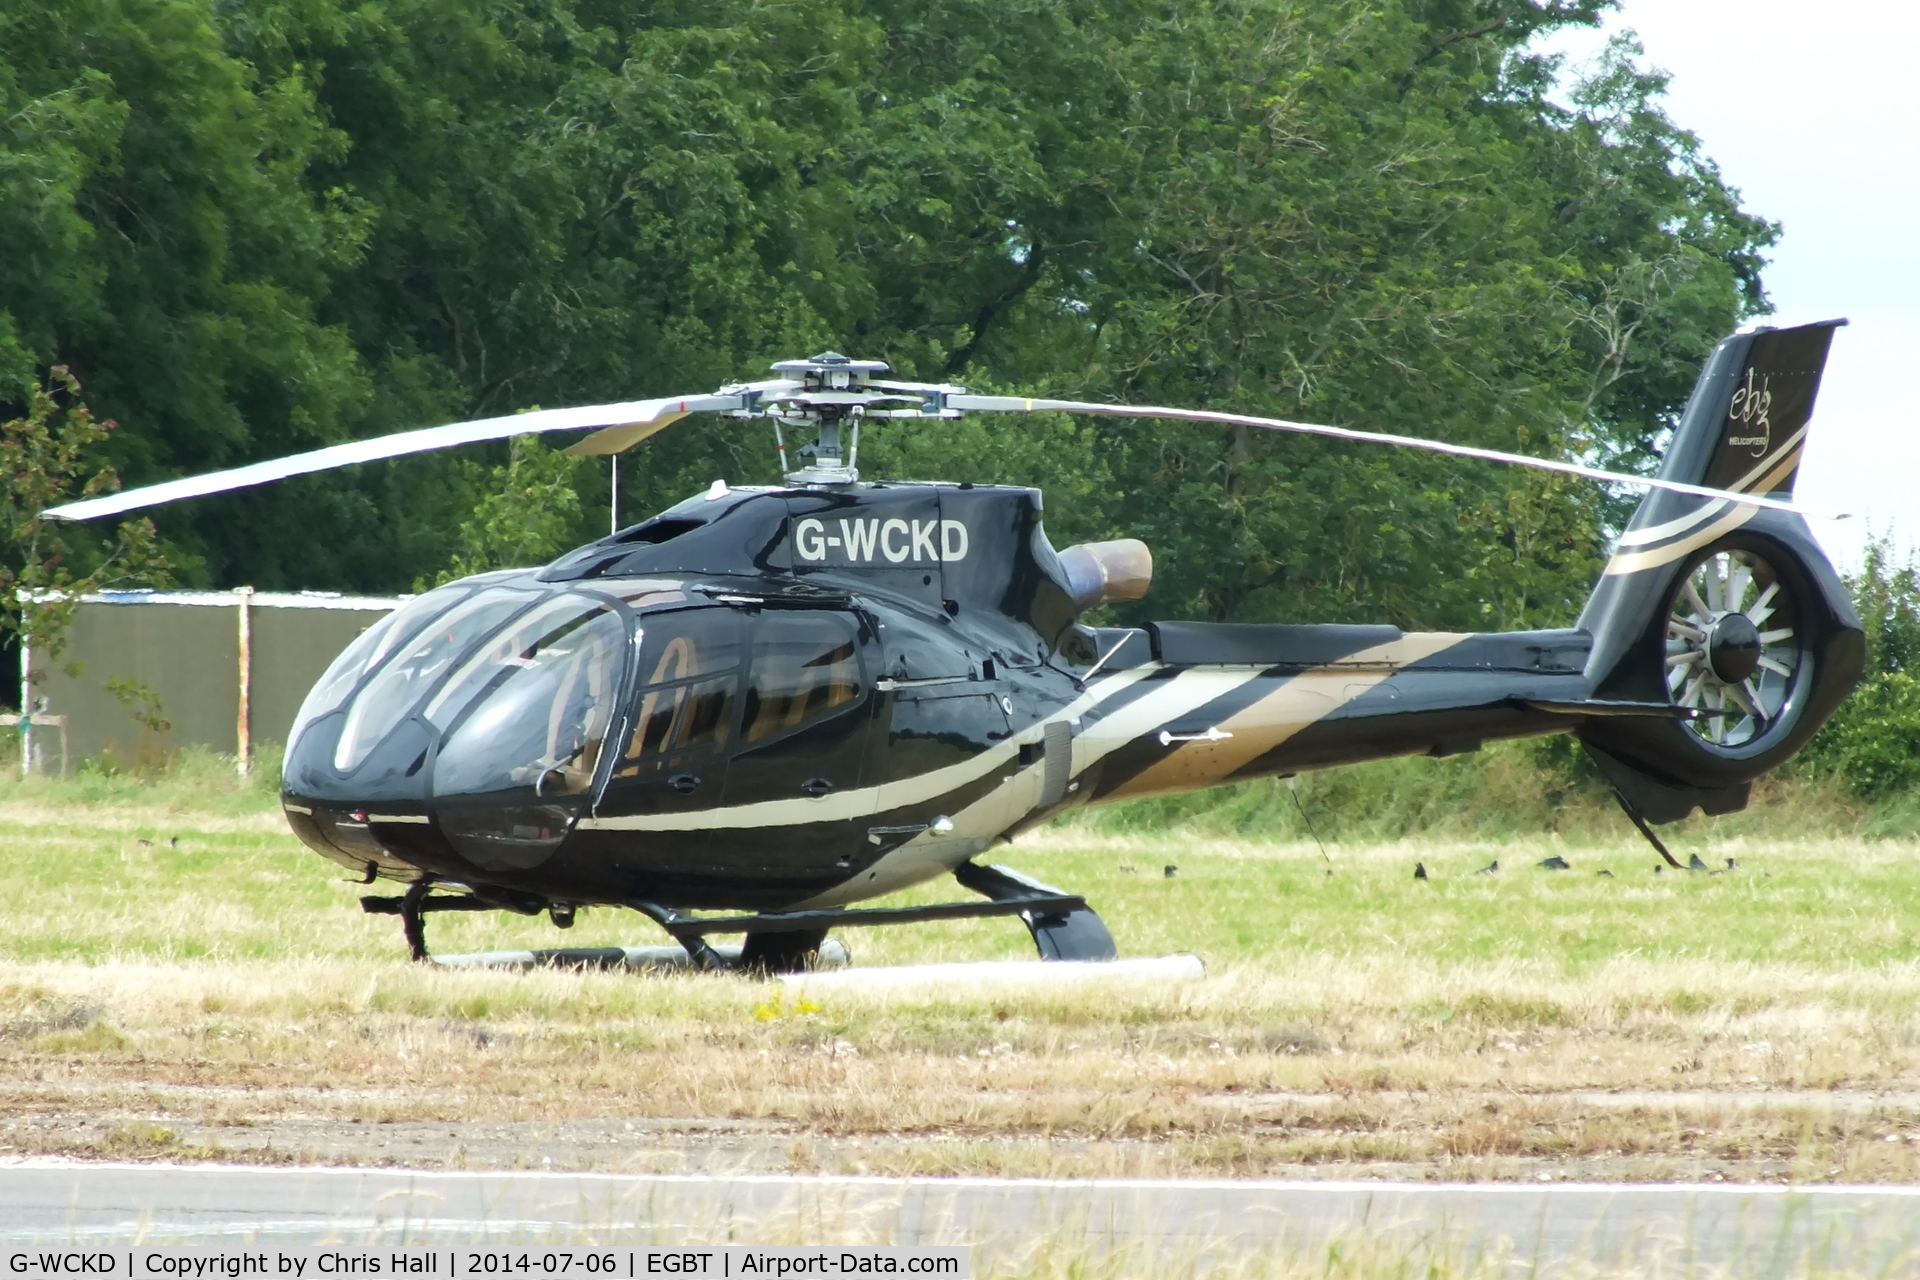 G-WCKD, 2009 Eurocopter EC-130B-4 (AS-350B-4) C/N 4746, ferrying race fans to the British F1 Grand Prix at Silverstone